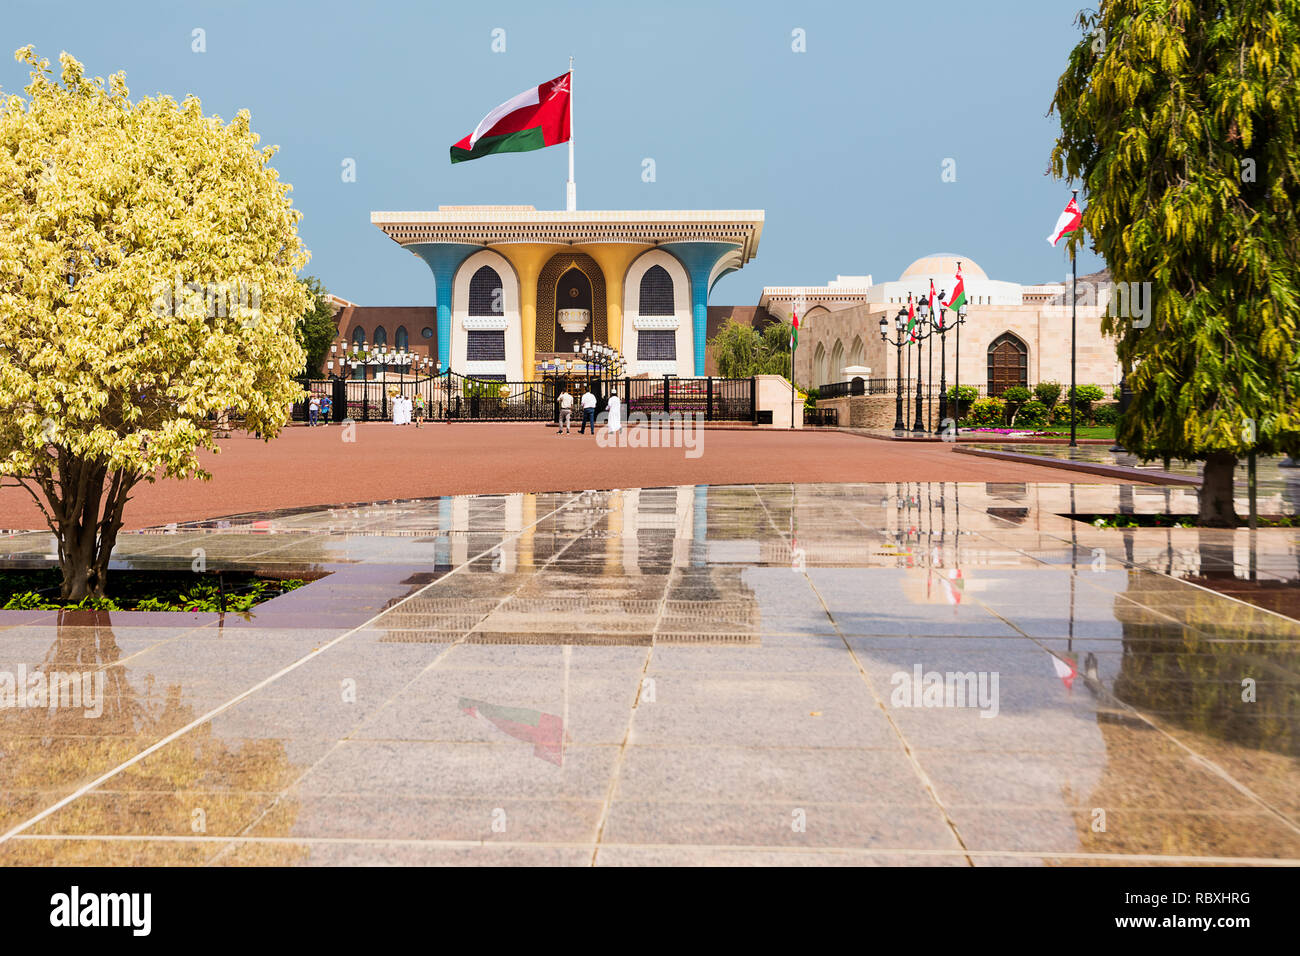 Muscat, Oman - November 1, 2018: Sultan Qaboos Palace in Muscat with tourists and reflections on the marbles Stock Photo